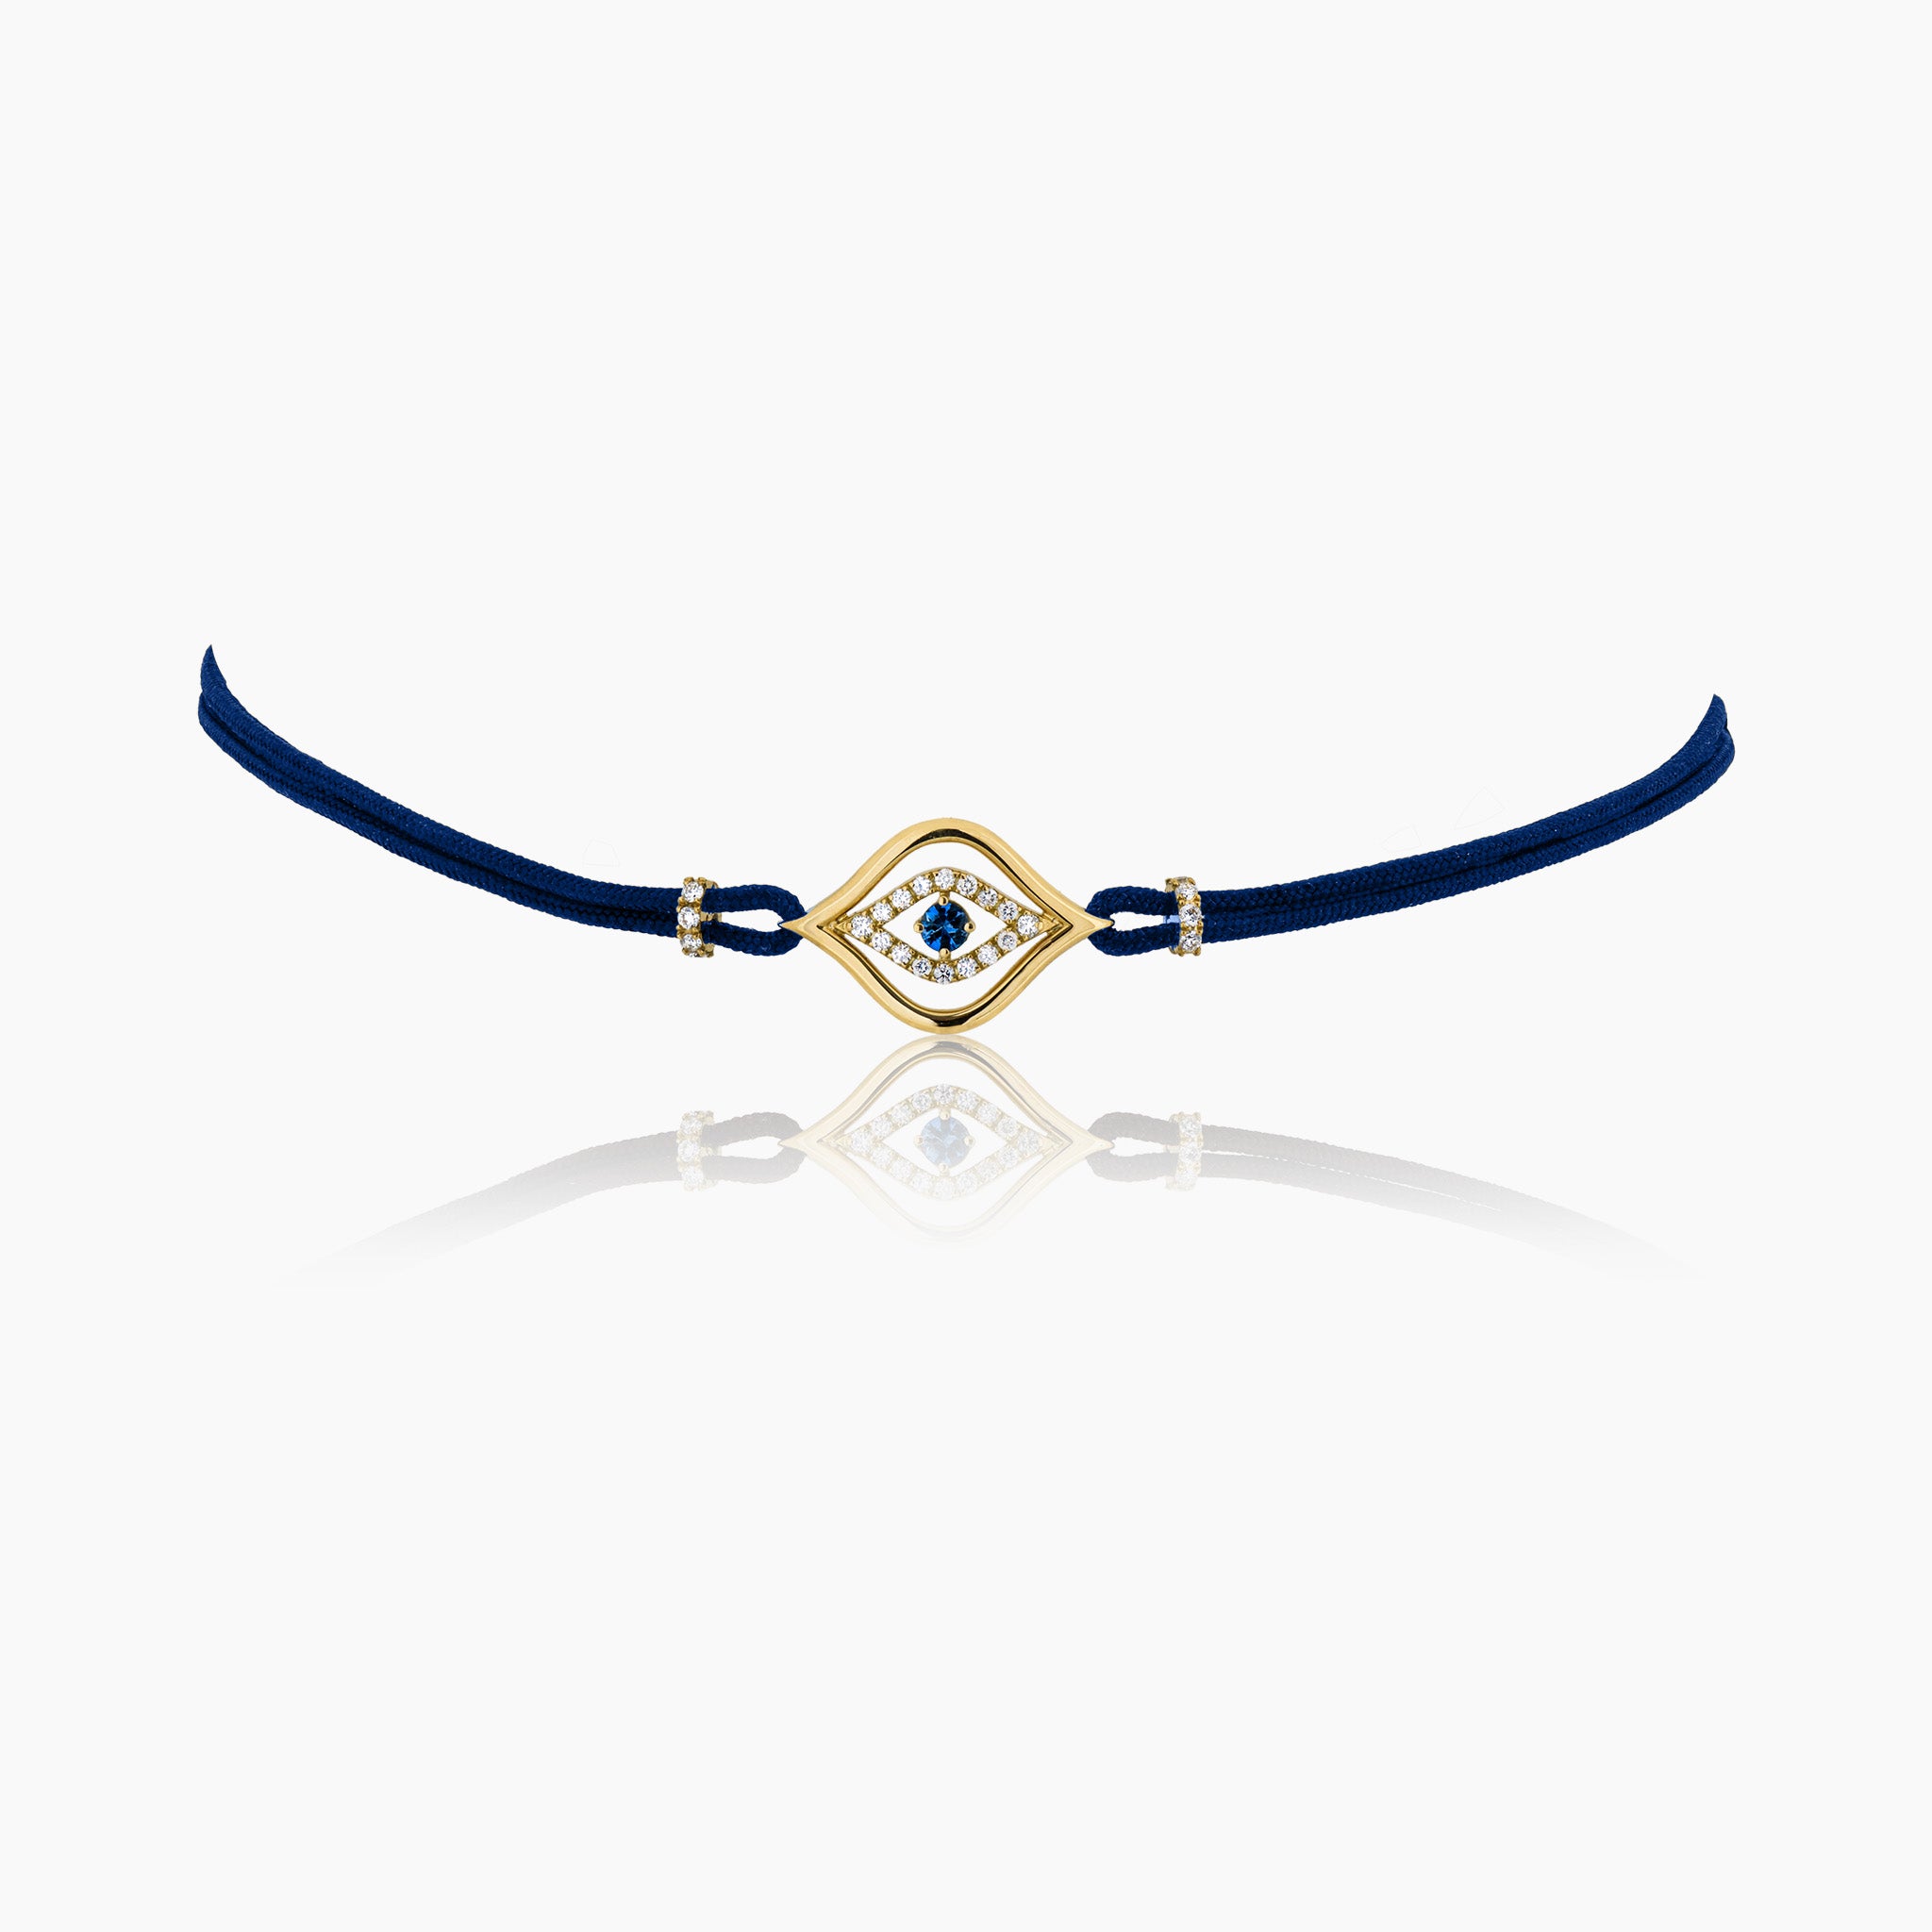 A stylish evil eye choker necklace in a navy blue cord  featuring a central sapphire surrounded by diamonds, set on a cord, presented against an off-white background.